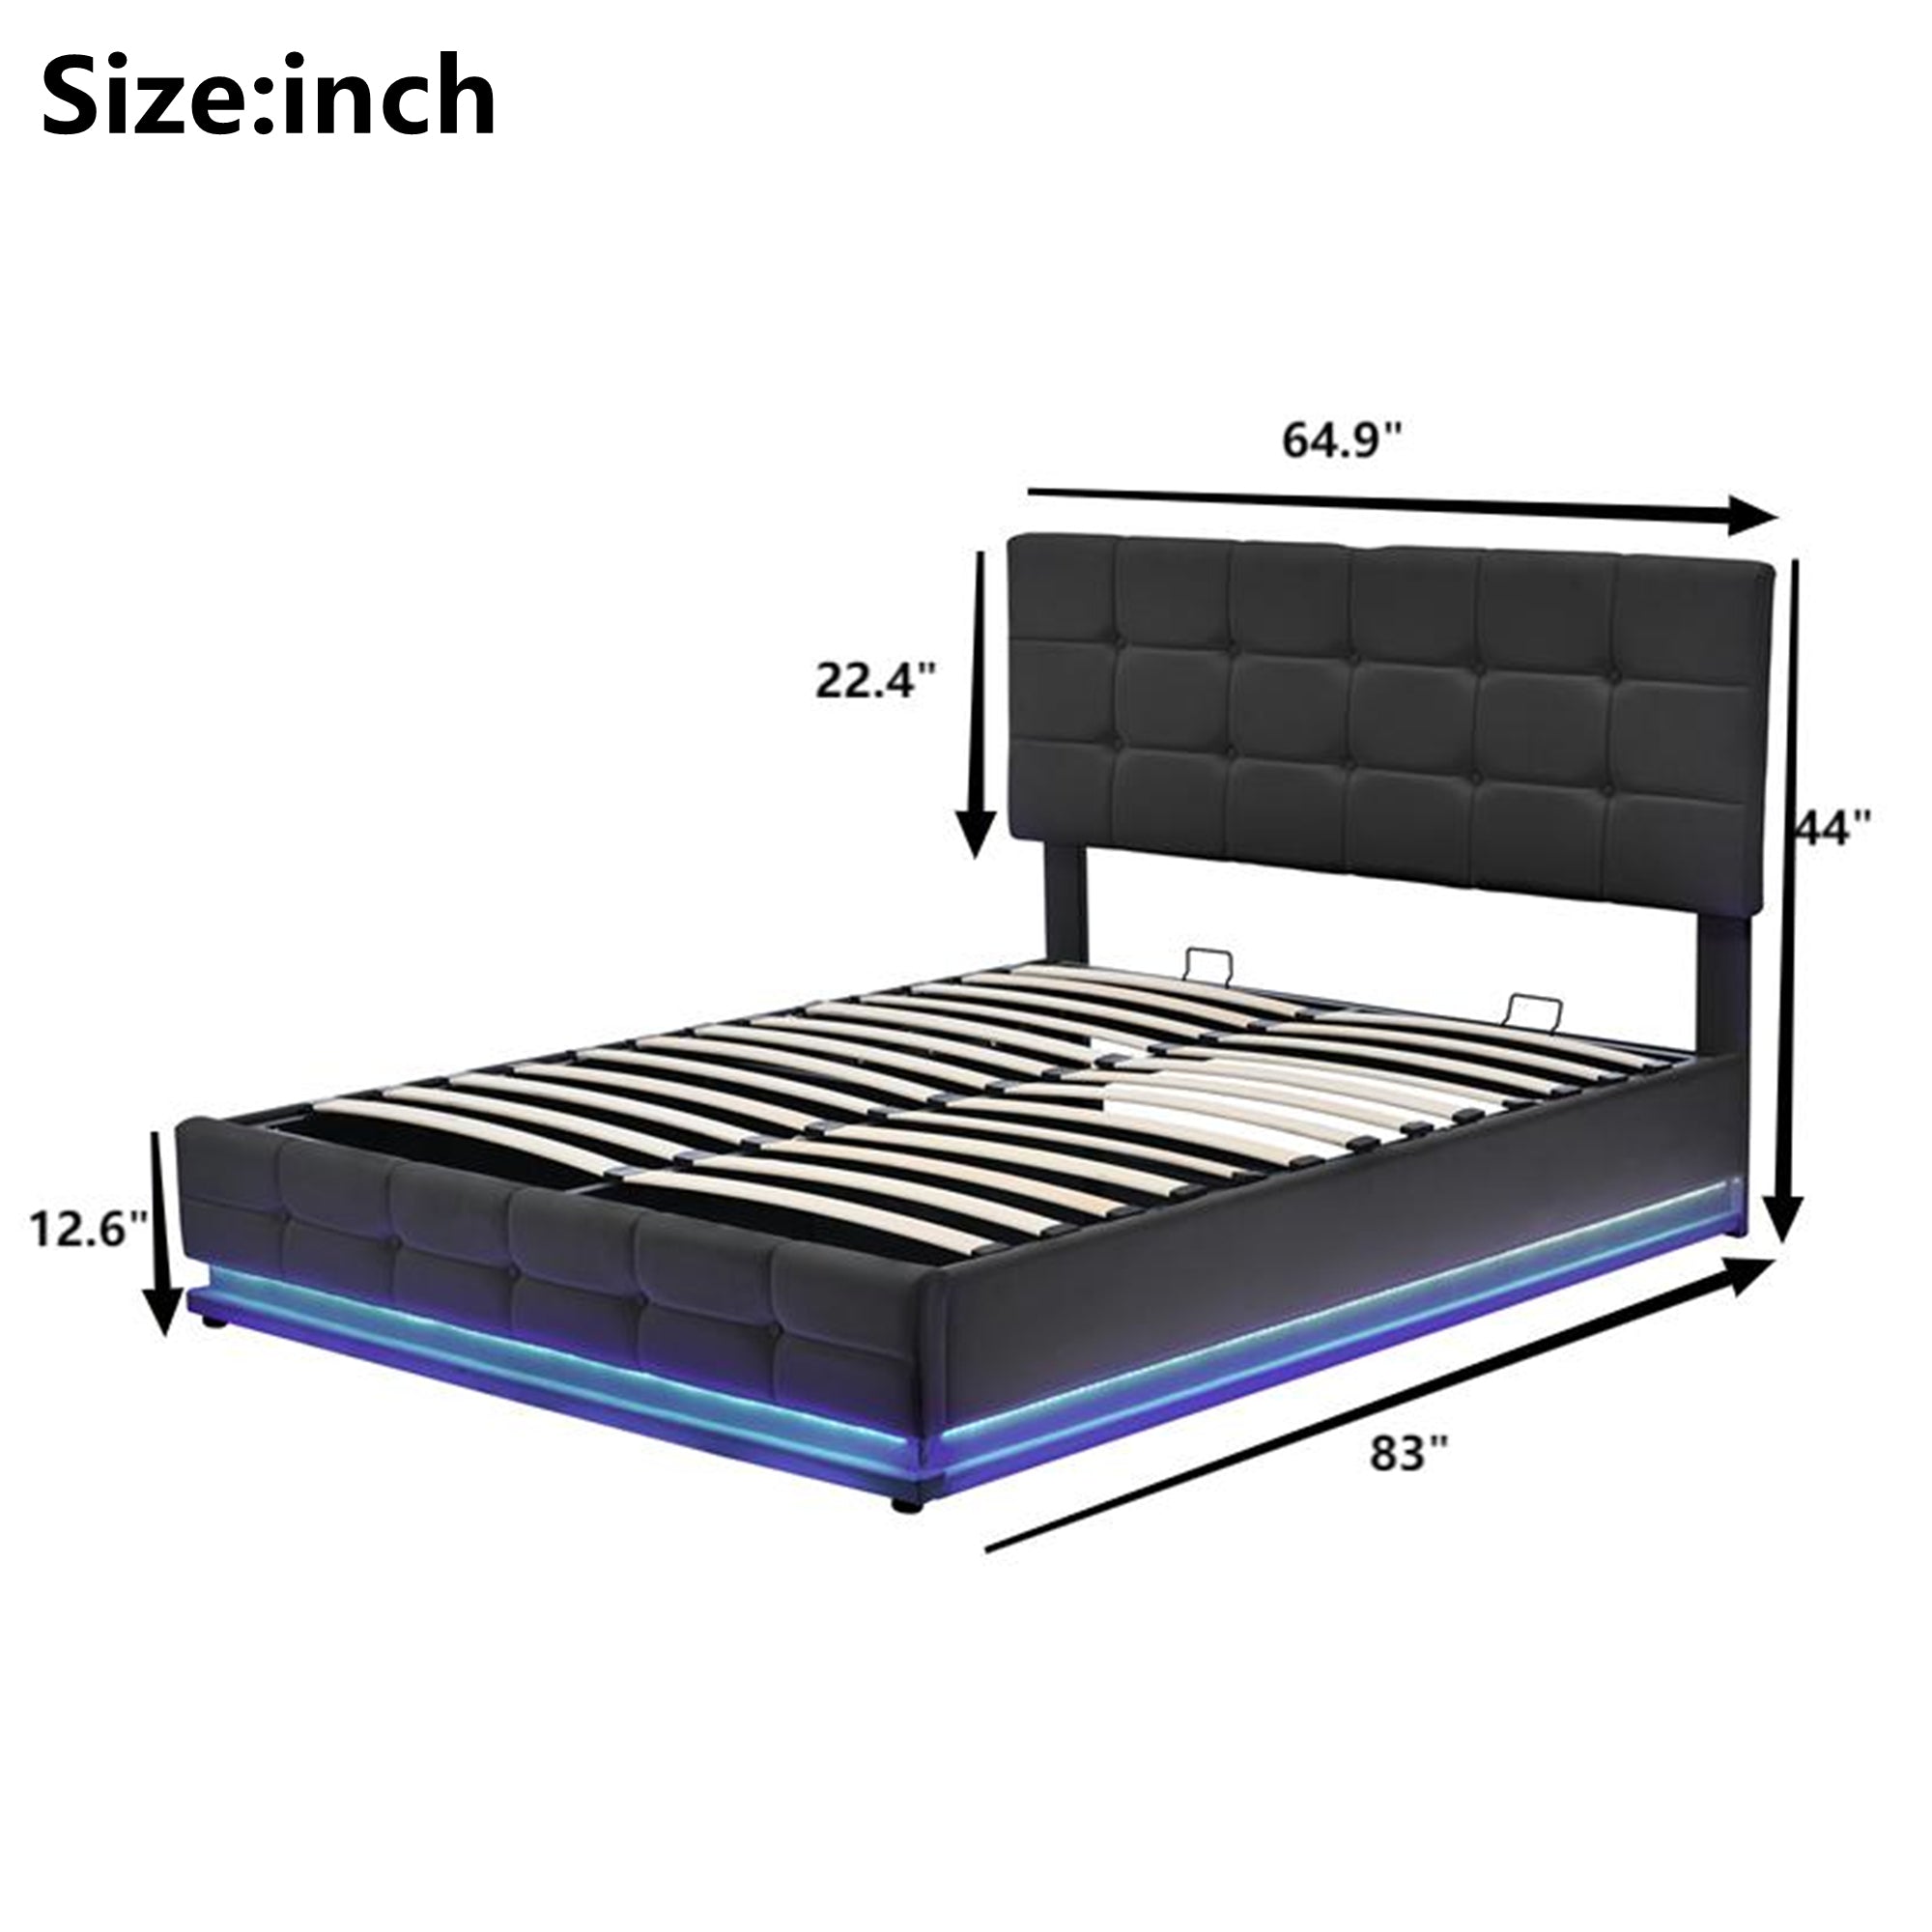 Kosmo Black Queen Tufted Faux Leather Hydraulic Lift Platform Storage Bed With LED Light, USB Charger